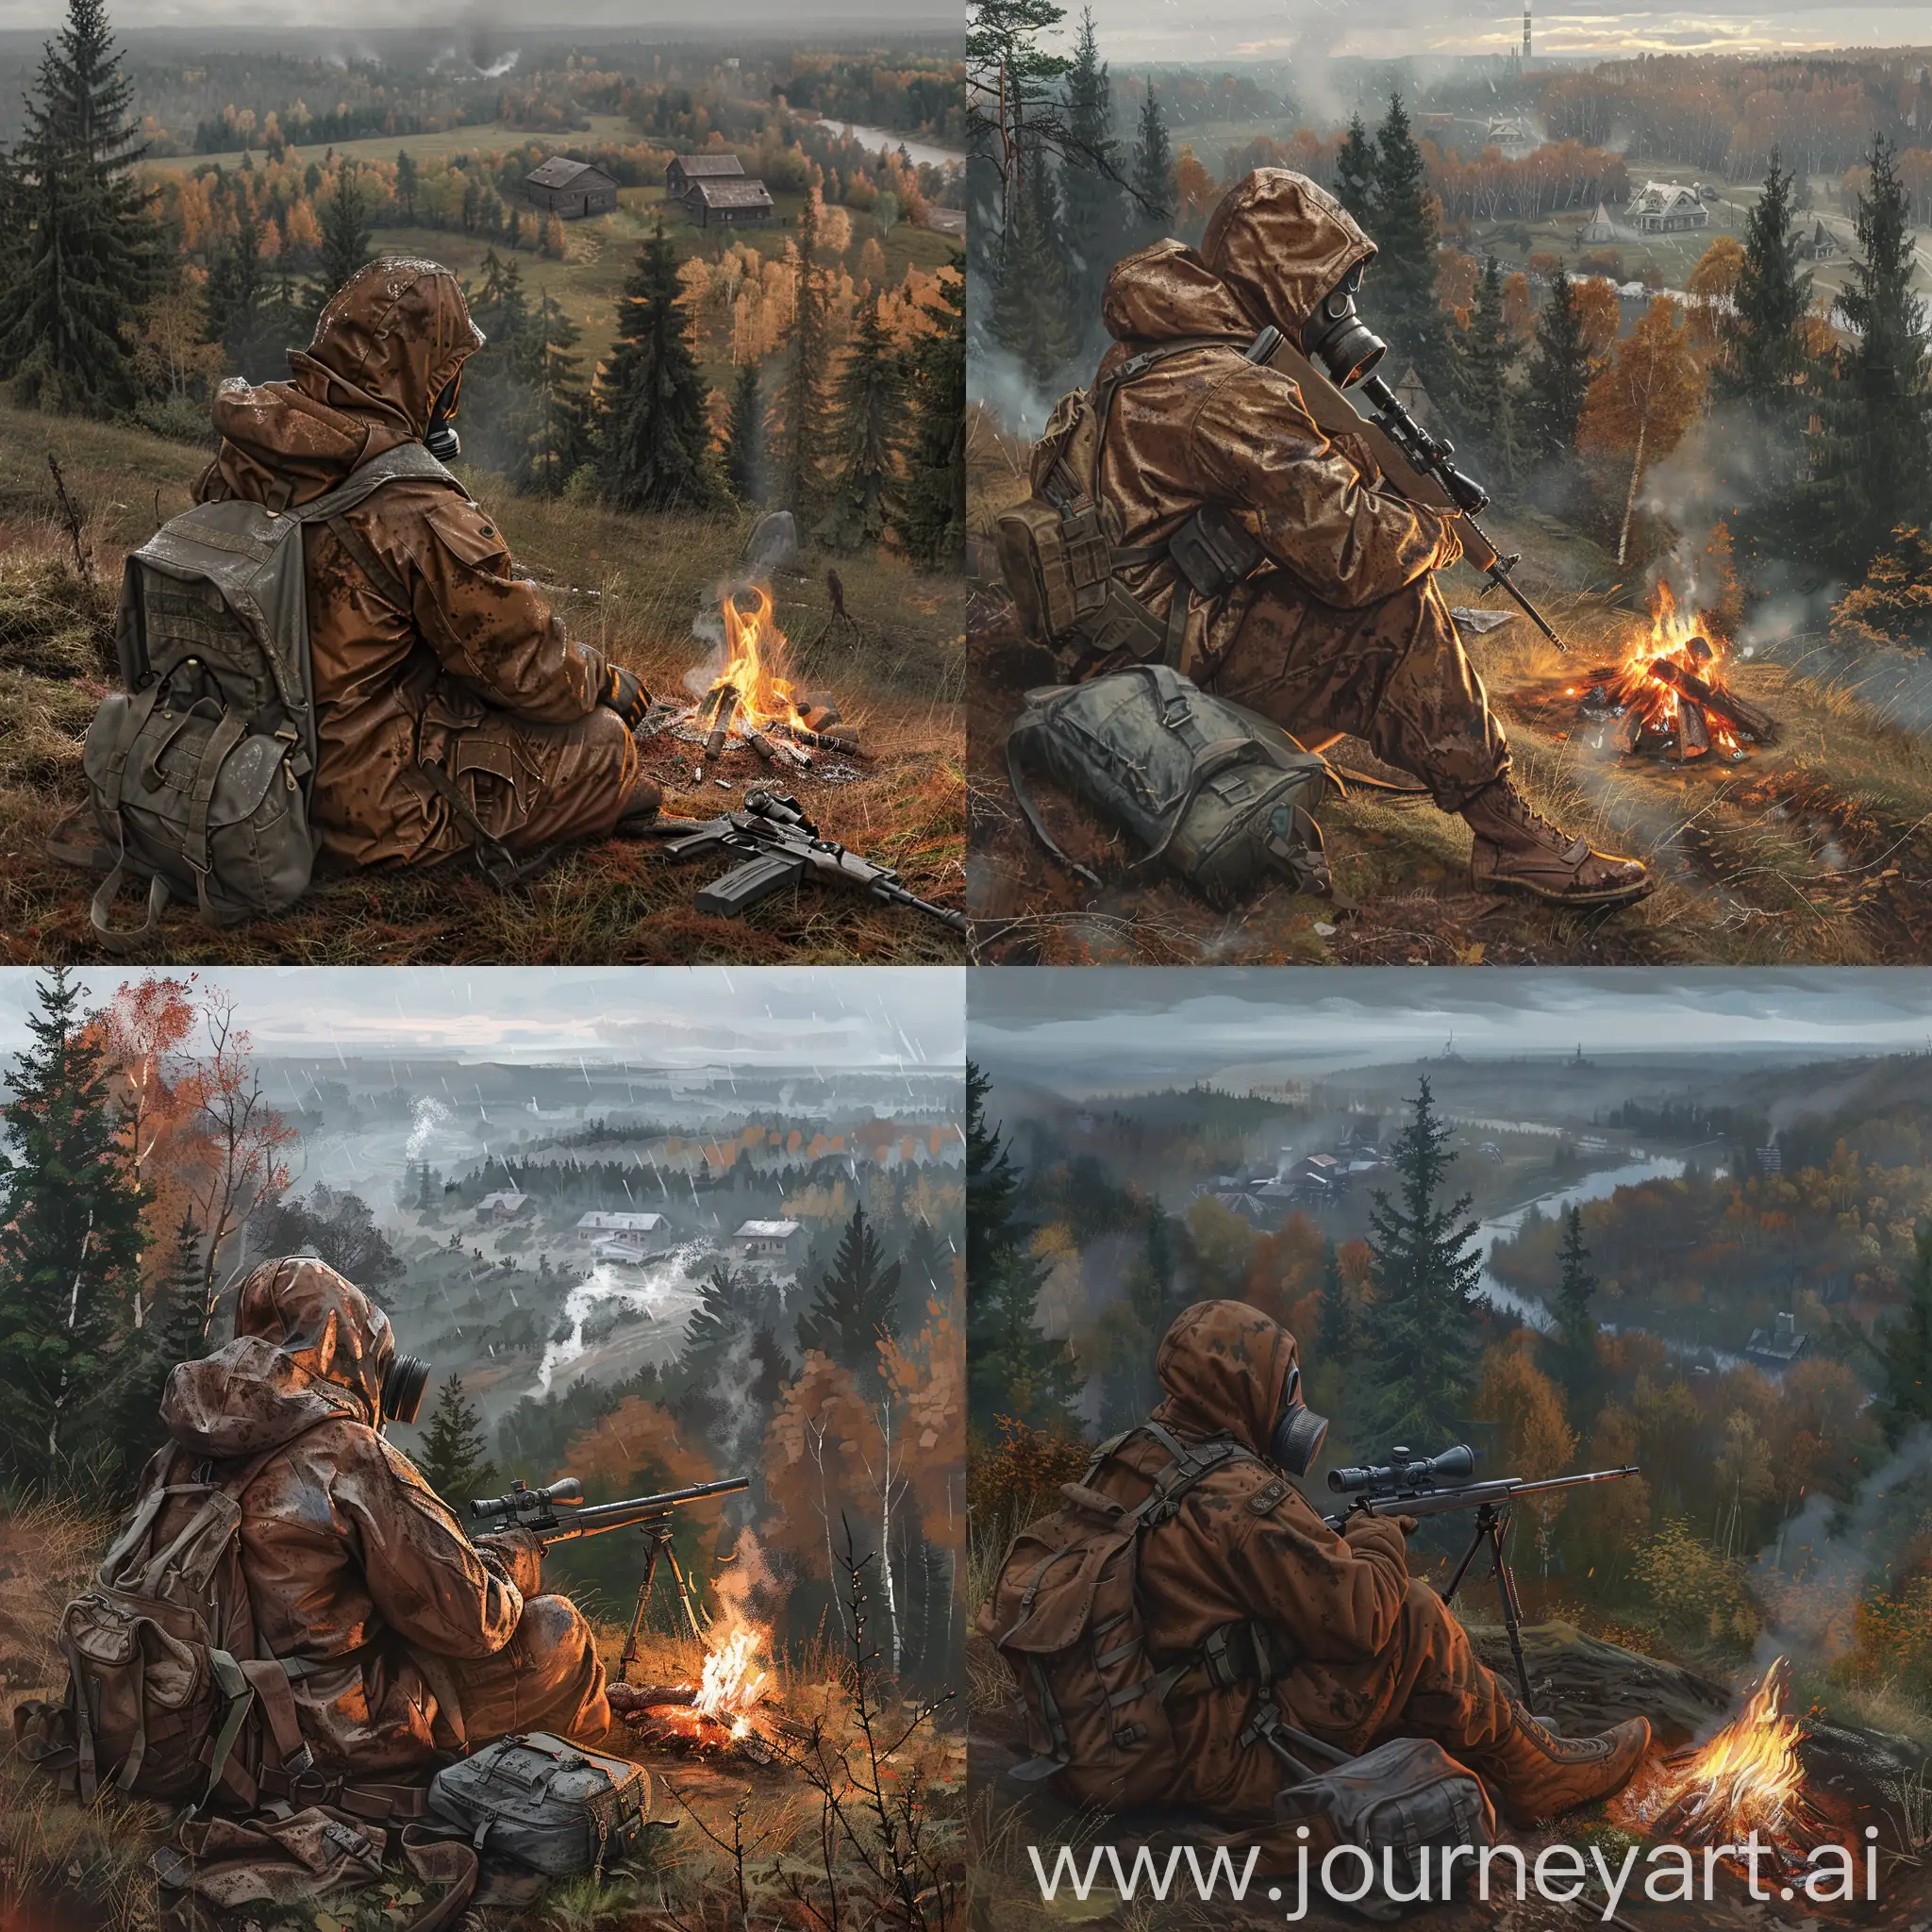 Stalker art, stalker are sitting on a hill by a campfire, stalker is wearing a brown military dirty raincoat with a gasmask on his face, he has a sniper rifle in his hands, a small gray backpack lies next to him, the weather is gloomy autumn, from the hill, where the stalkers are sitting, there is a view of the forest and an abandoned Soviet village standing in the distance.